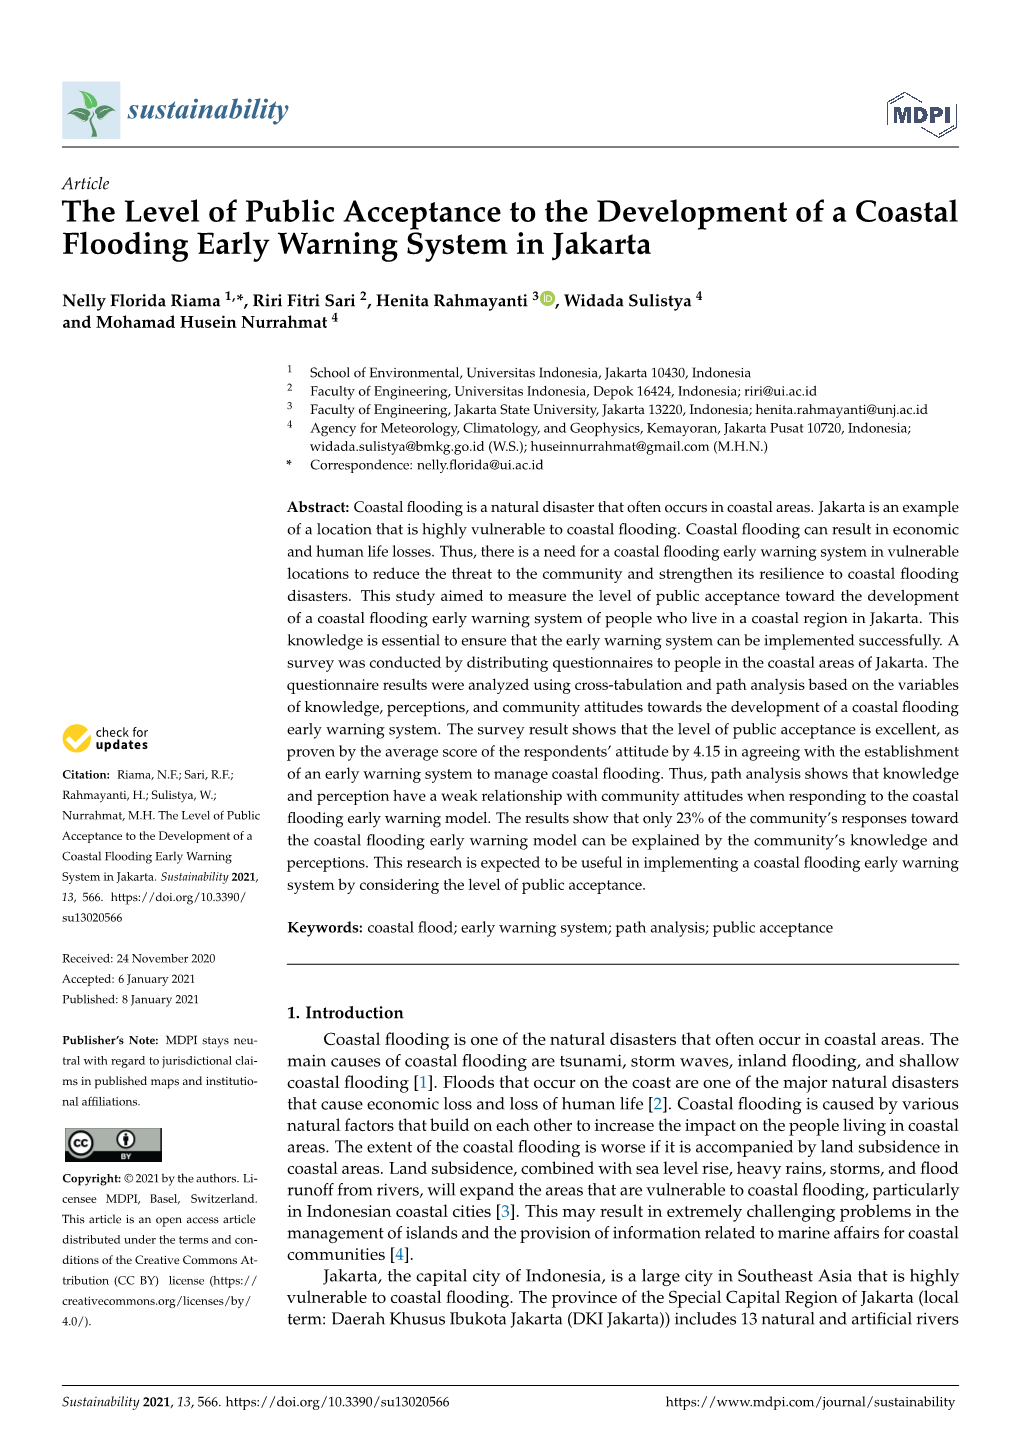 The Level of Public Acceptance to the Development of a Coastal Flooding Early Warning System in Jakarta